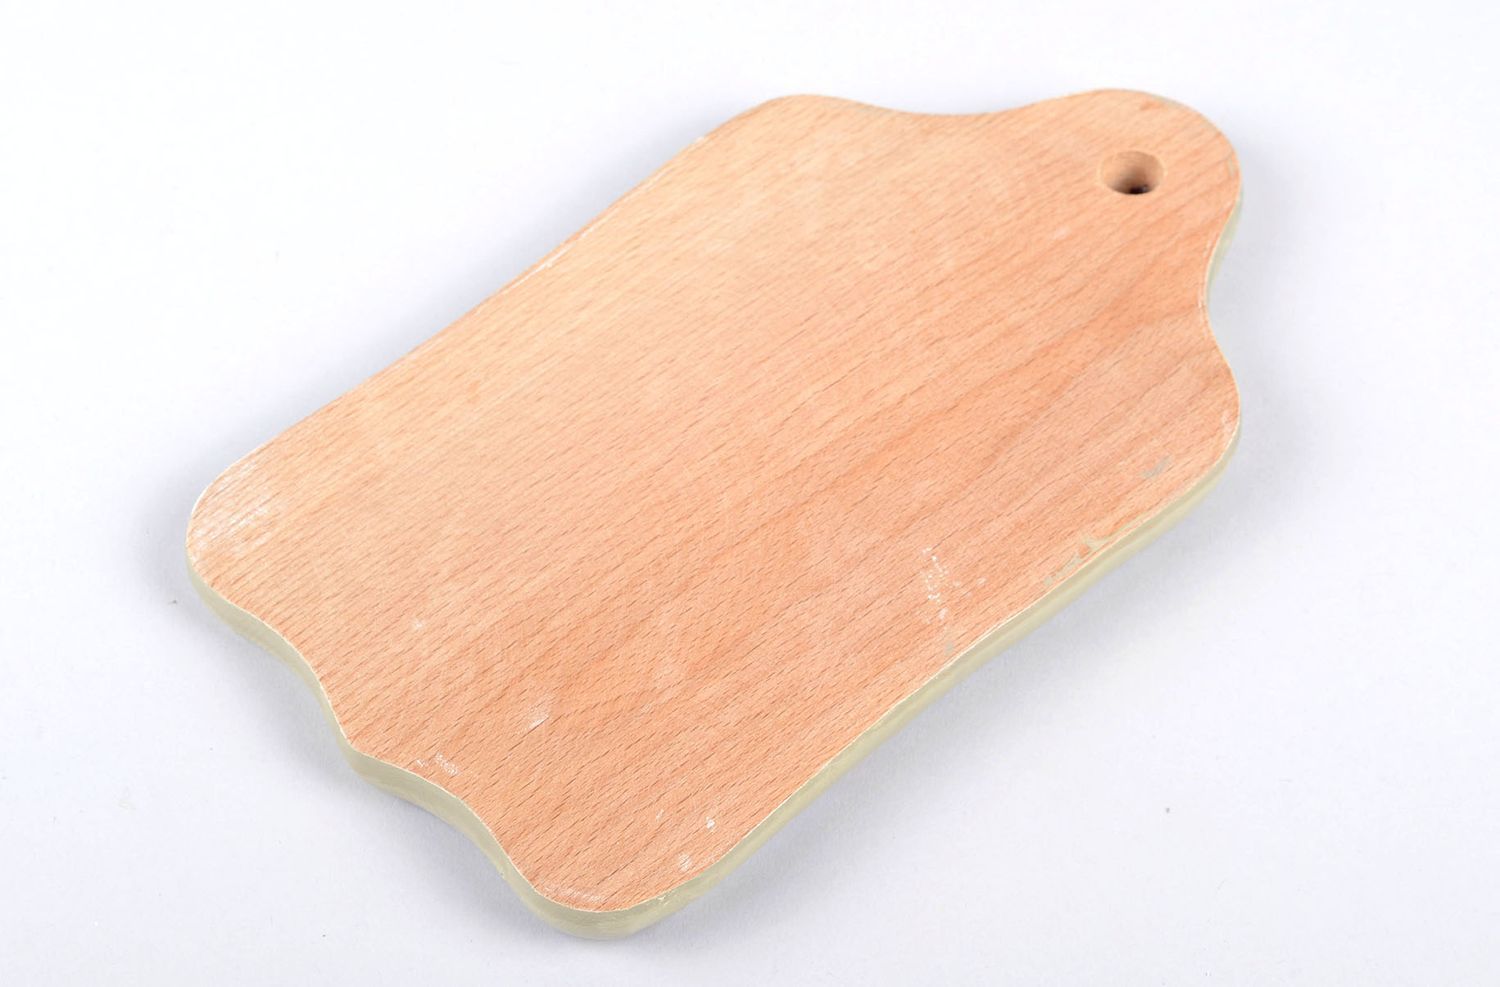 Handmade cutting board wooden utensils for decorative use only kitchen decor photo 2